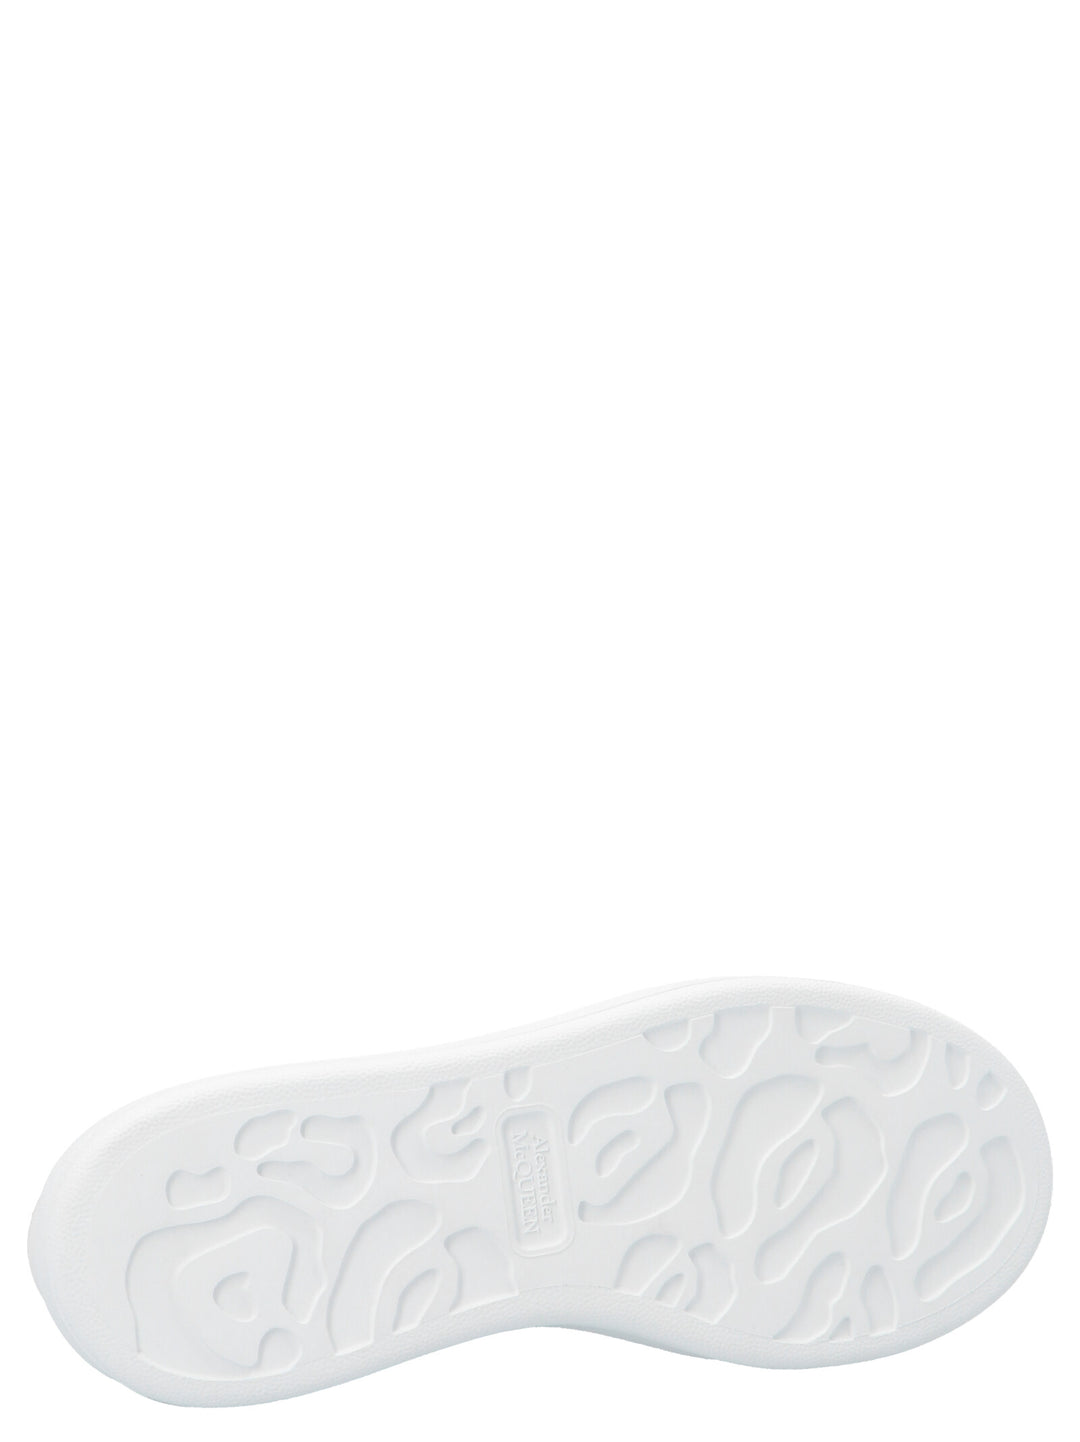 'Oversize sole’ Sneakers Bianco